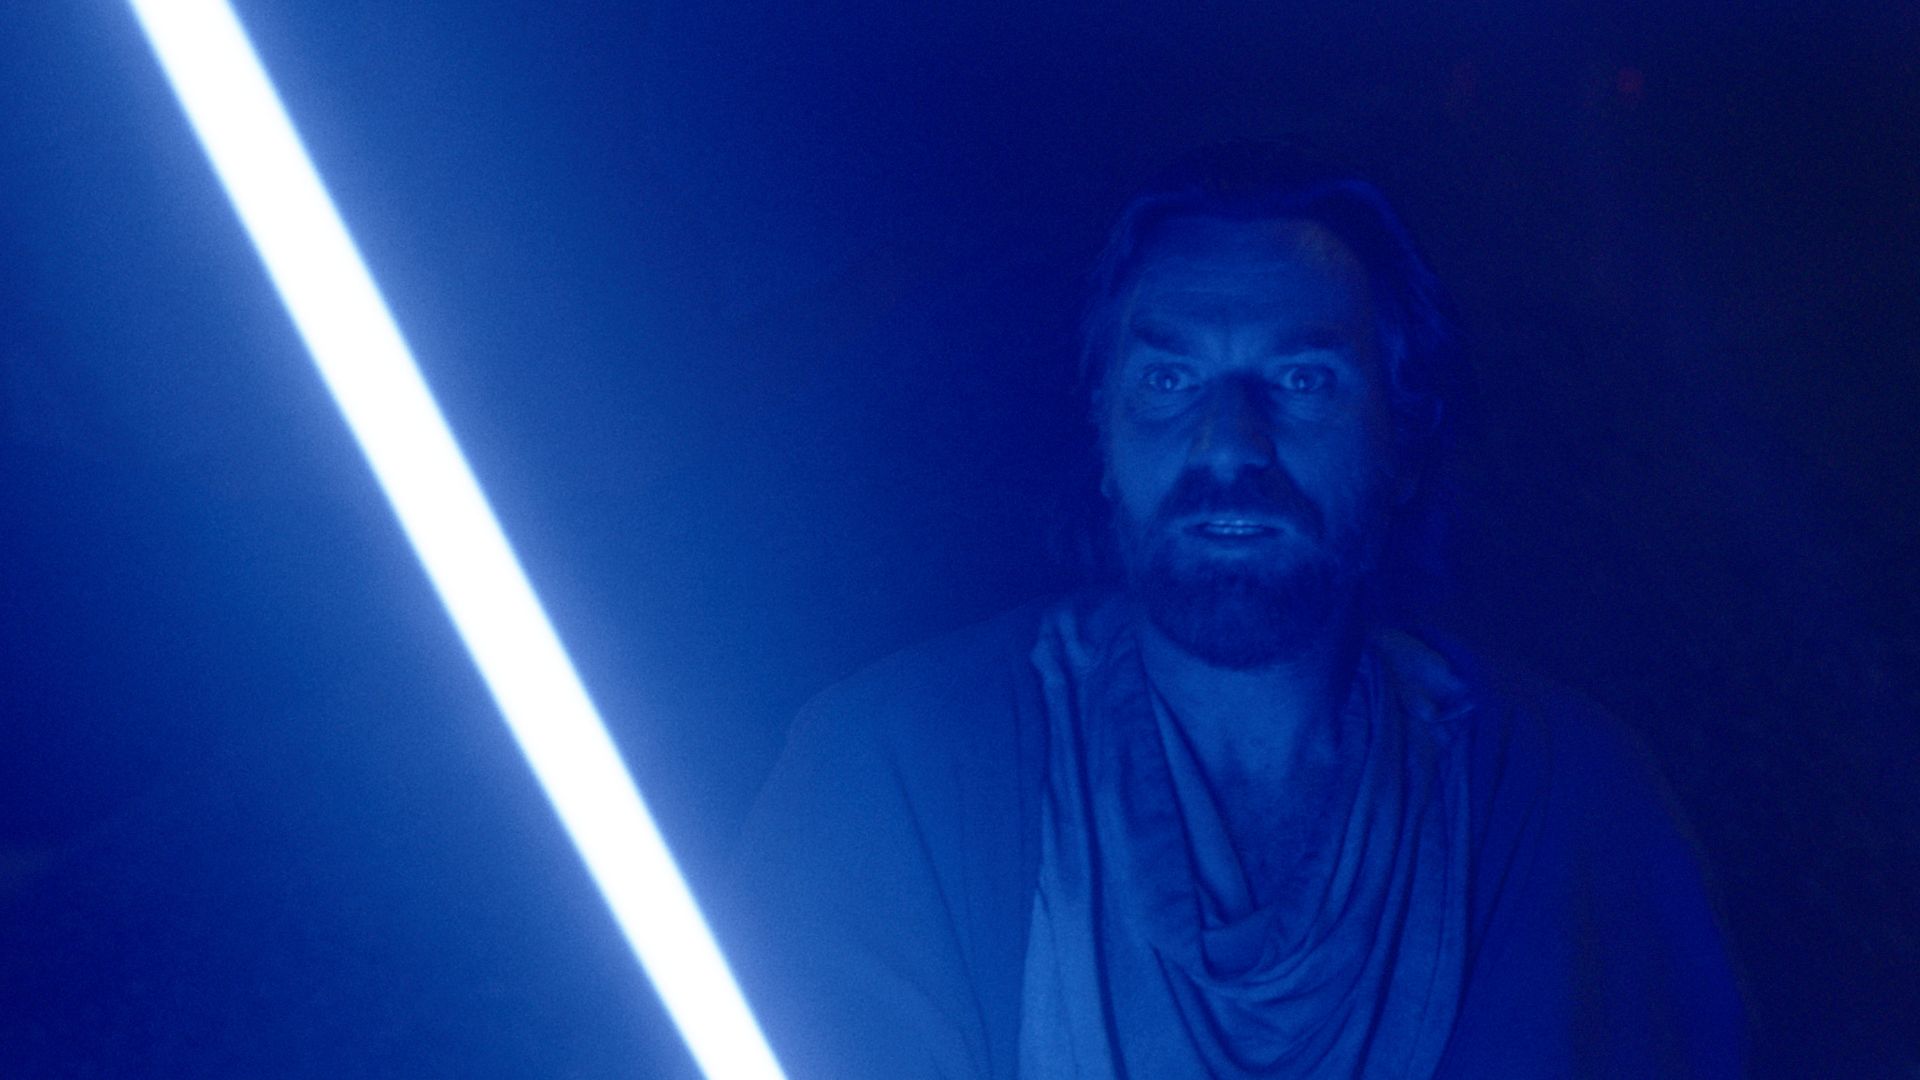 Obi-Wan Kenobi episode 3 review: “The show gets everything right about Darth Vader”